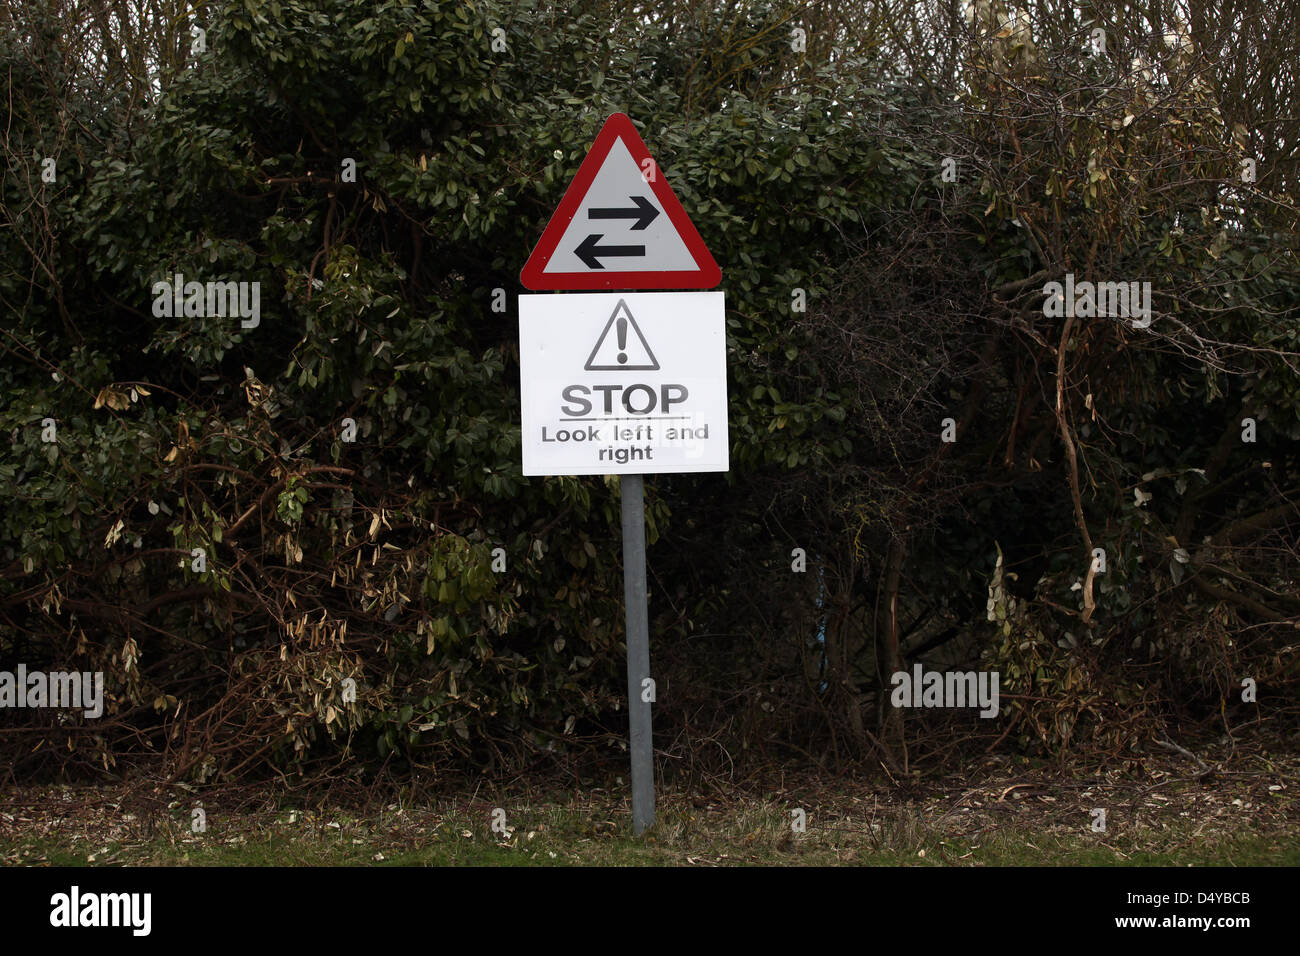 Road sign warning of two way traffic ahead, telling drivers to stop, look left and right. March 2013 Stock Photo